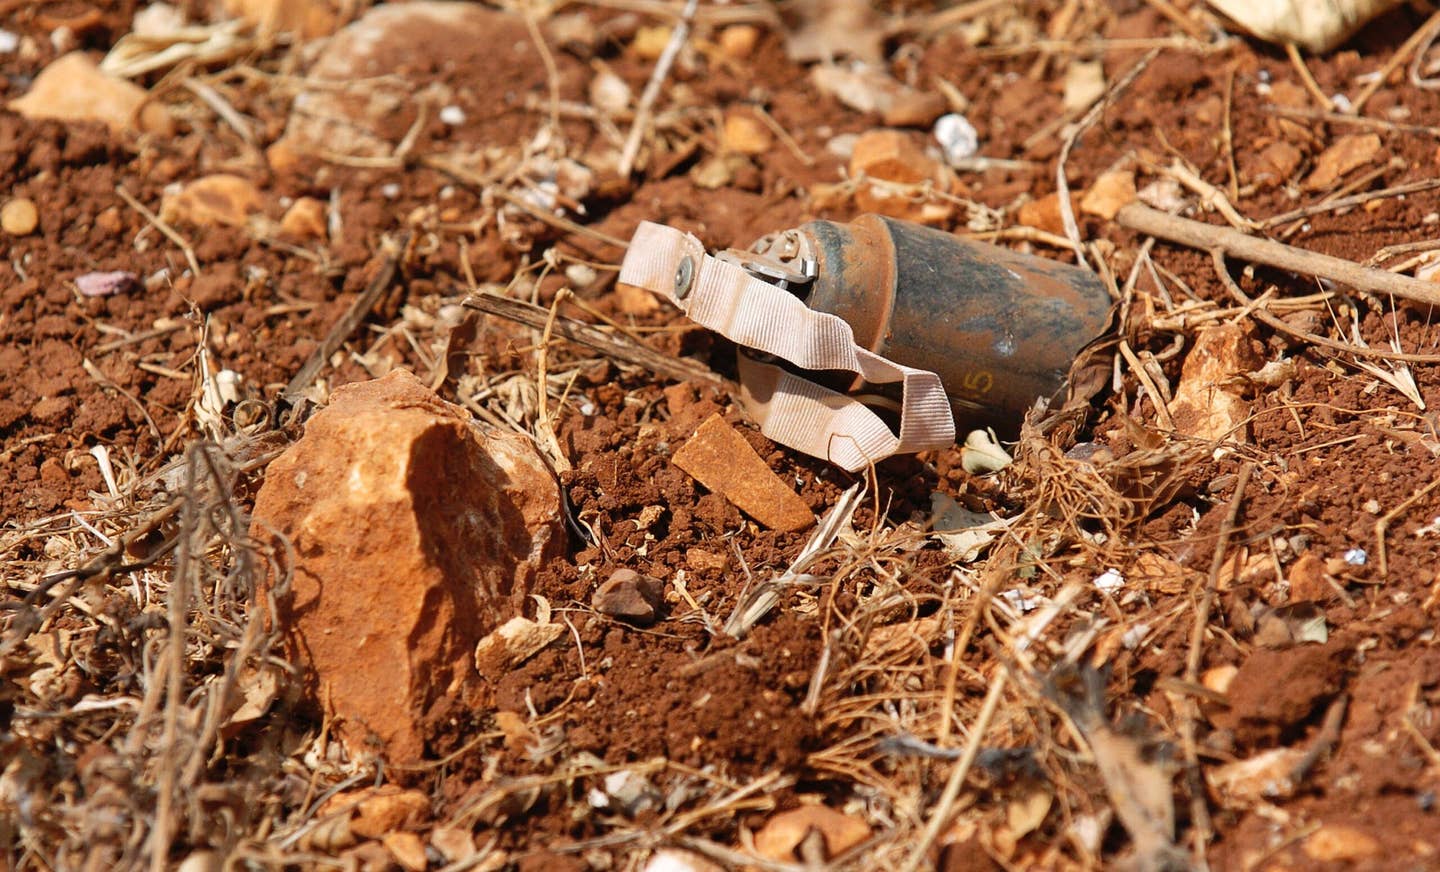 An unexploded cluster bomb identified by members of the Mine Advisory Group (MAG) rests in a backyard garden August 21, 2006 in Yohmor, Lebanon. (Photo by Scott Peterson/Getty Images)